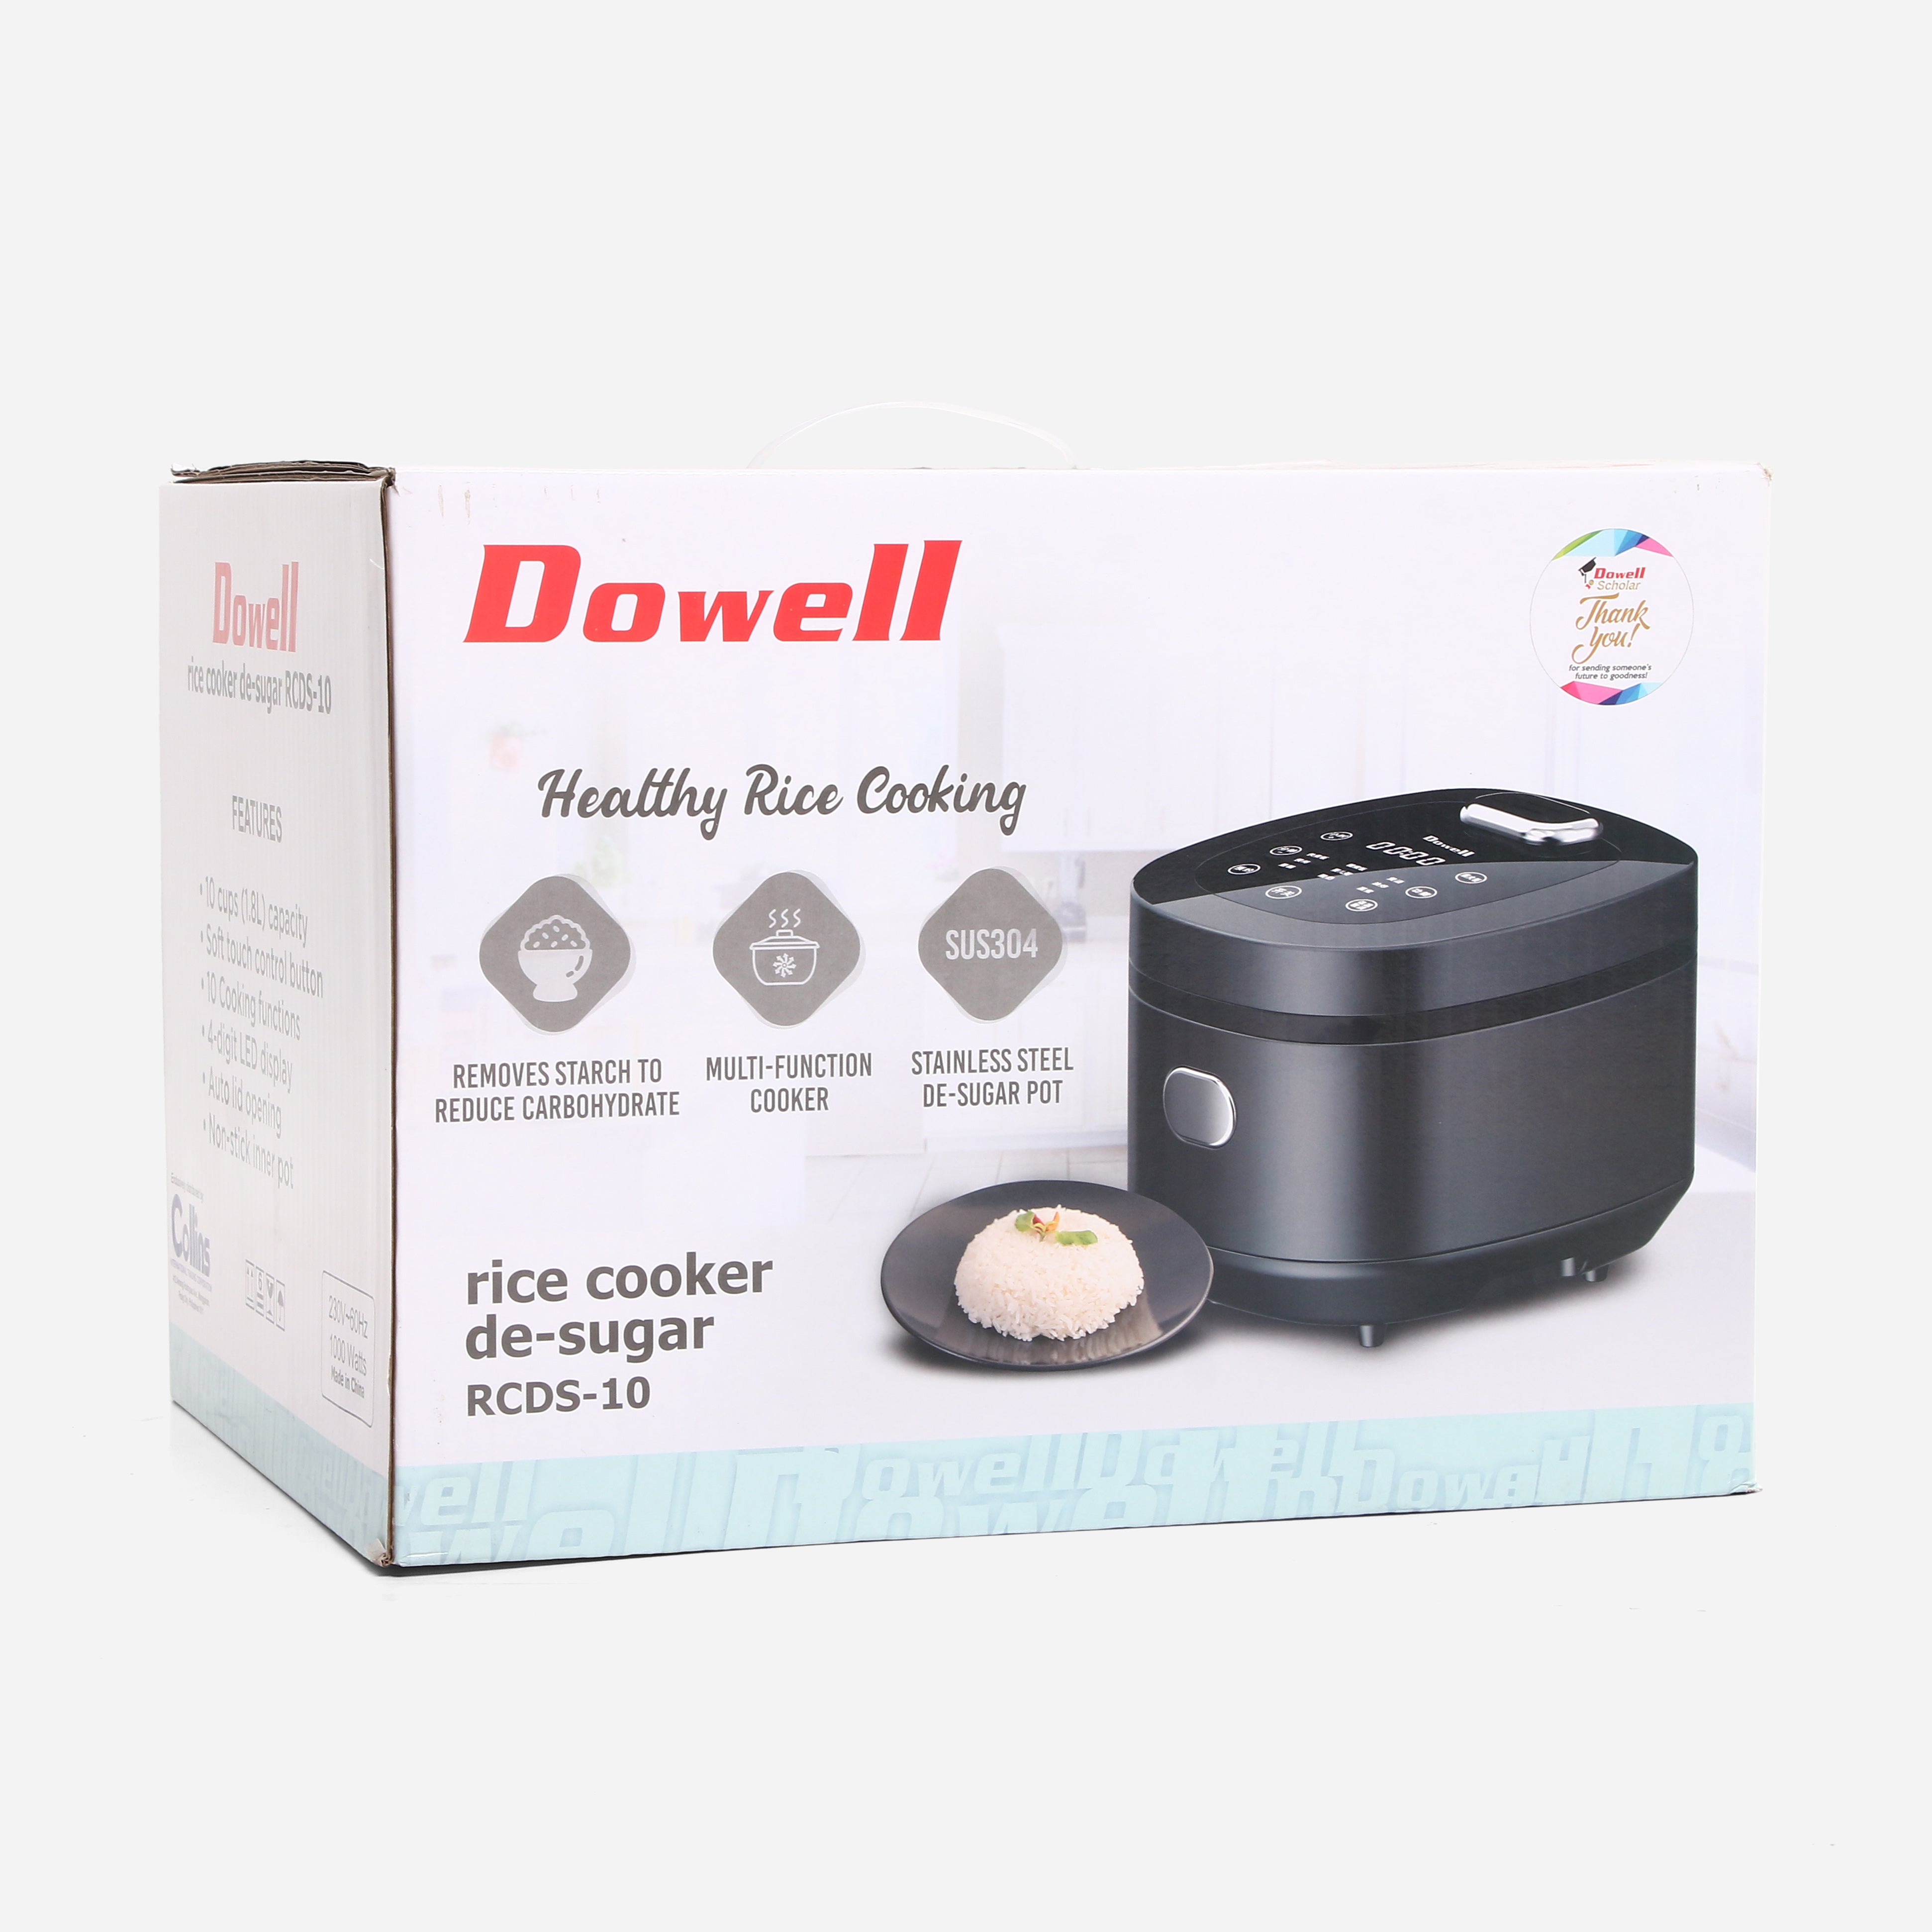 Dowell - No more guilt this holiday with Dowell Low Carb Rice Cooker.  Powered with stainless steel de-sugar pot, it removes starch to reduce  carbohydrates. It can also be used as multi-function